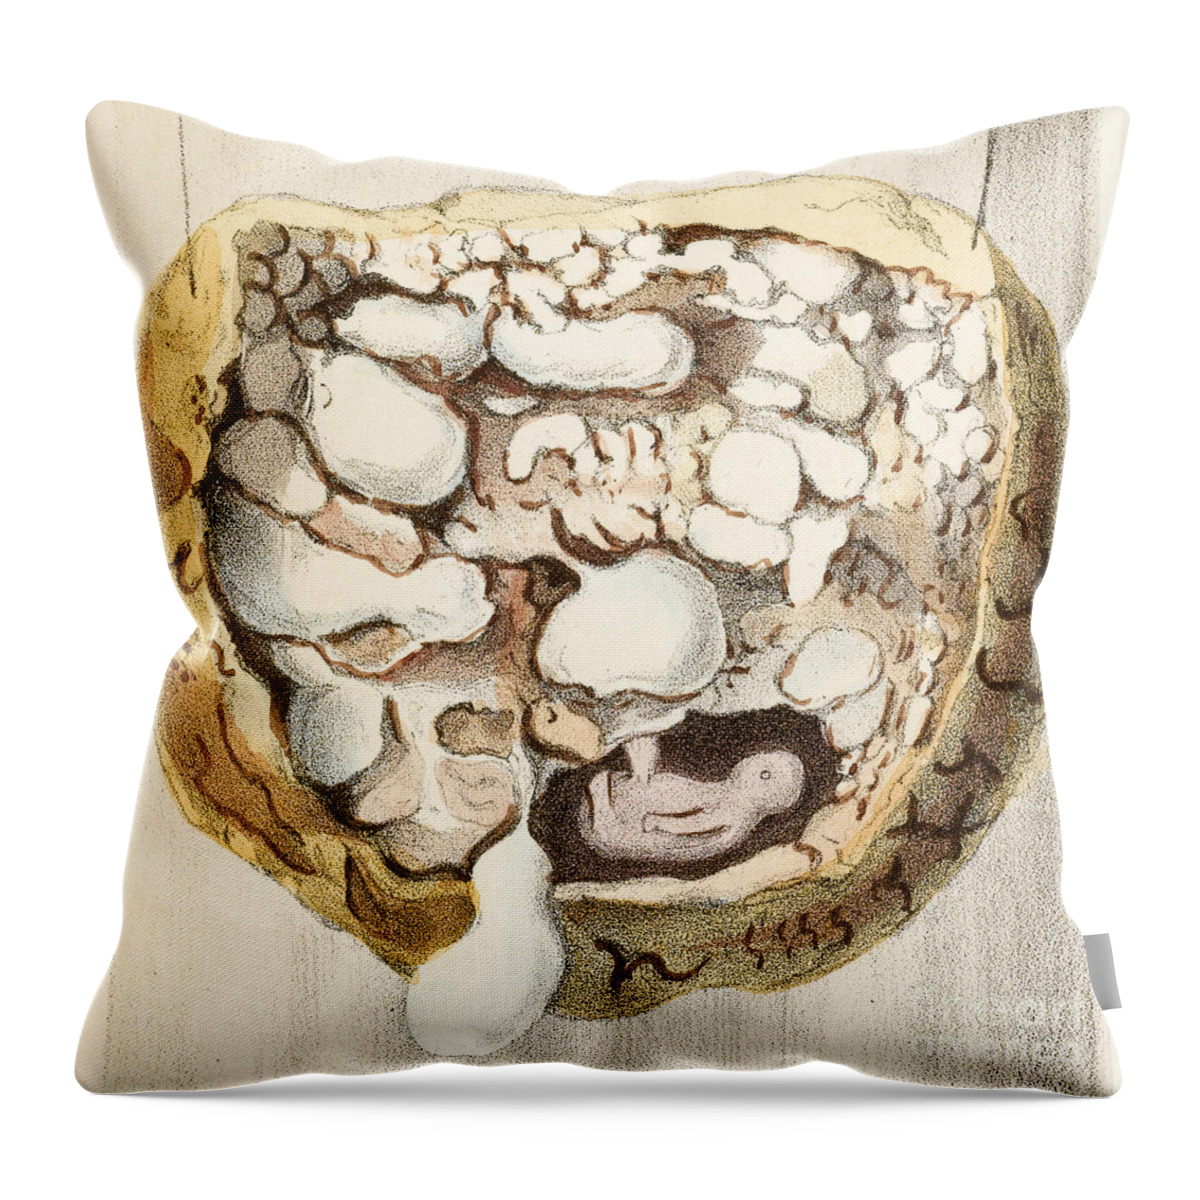 Historic Throw Pillow featuring the photograph Placenta With Tumors, Illustration, 1836 by Wellcome Images